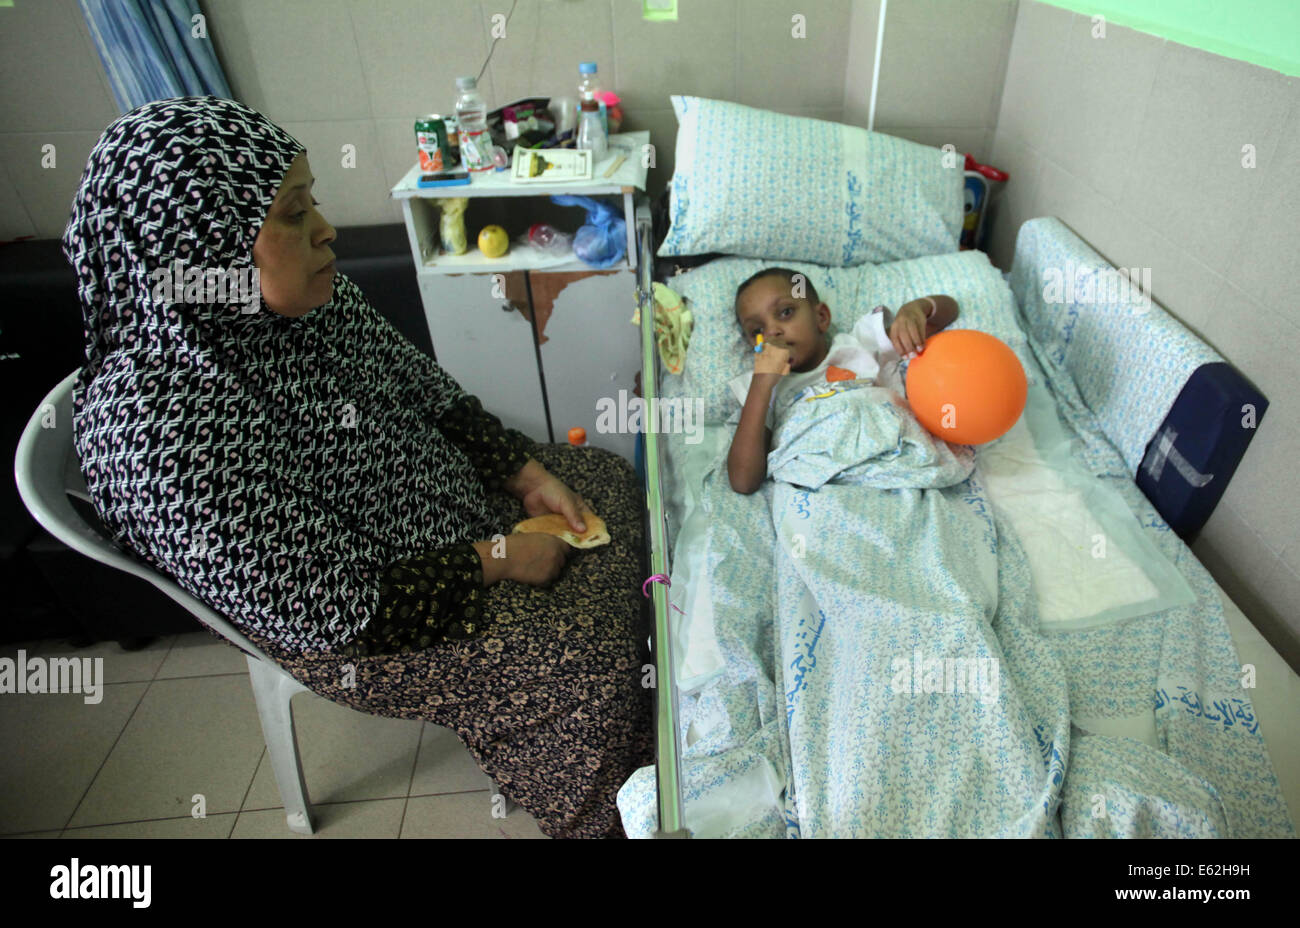 Jerusalem, Jerusalem, Palestinian Territory. 12th Aug, 2014. Mother of Khaled Abu Mrahil, a 6-year-old Palestinian boy, who medics said was wounded during the Israeli offensive on Gaza Strip, sits near her son as he lies on a bed at al-Maqased hospital in Jerusalem on August 12, 2014. Talks to end a month-long war between Israel and Gaza militants are ''difficult'', Palestinian delegates said on Tuesday, while an Israeli official said no progress had been made so far. As a 72-hour ceasefire held for a second day, Palestinian negotiators Credit:  Saeed Qaq/APA Images/ZUMA Wire/Alamy Live News Stock Photo